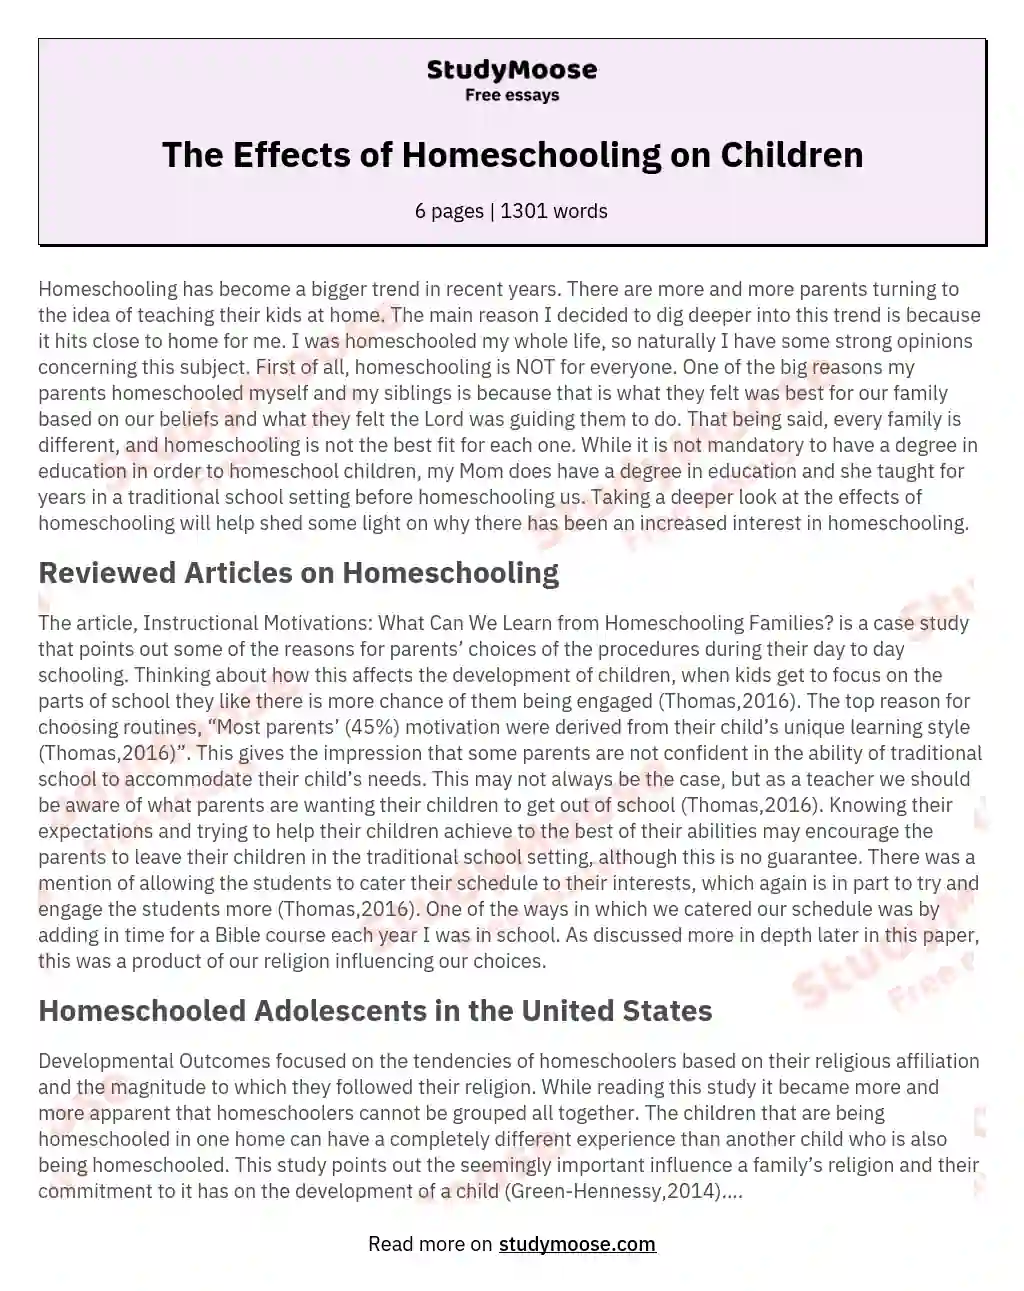 opinion essay about homeschooling